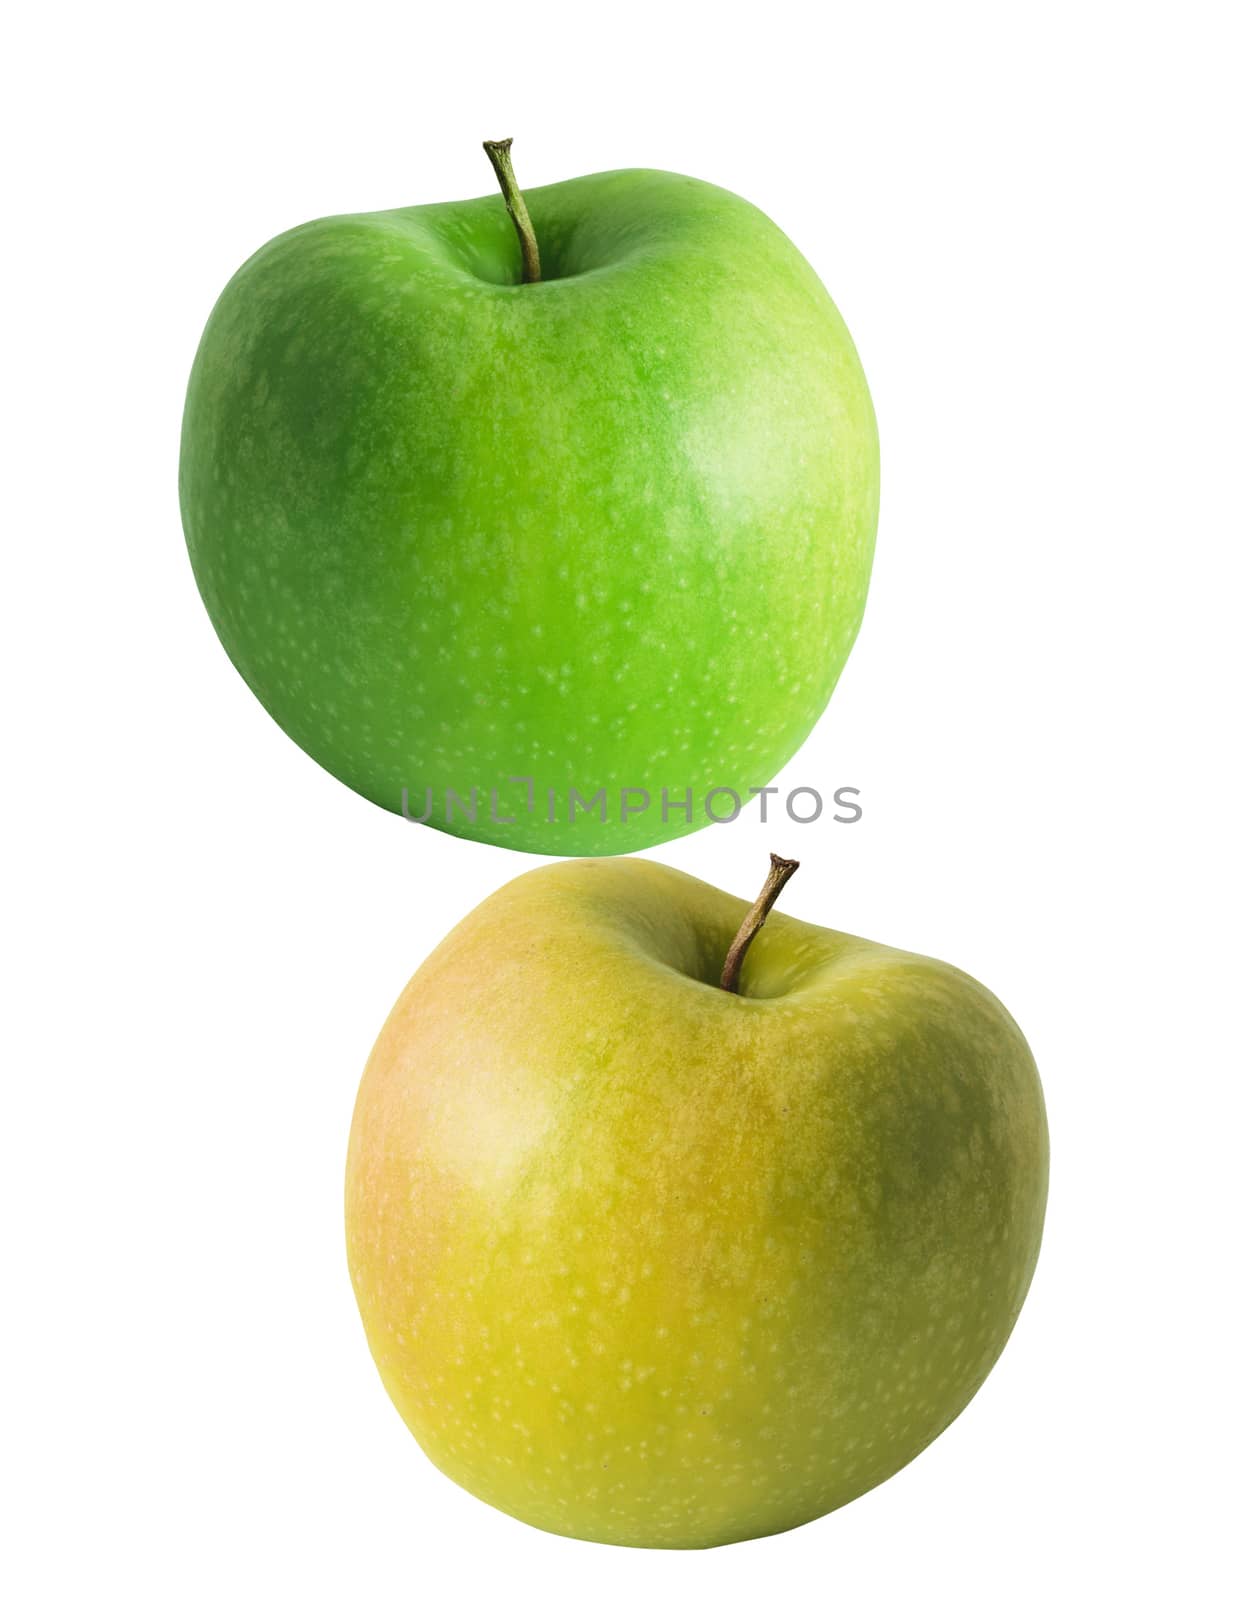 green and yellow apples isolated on white